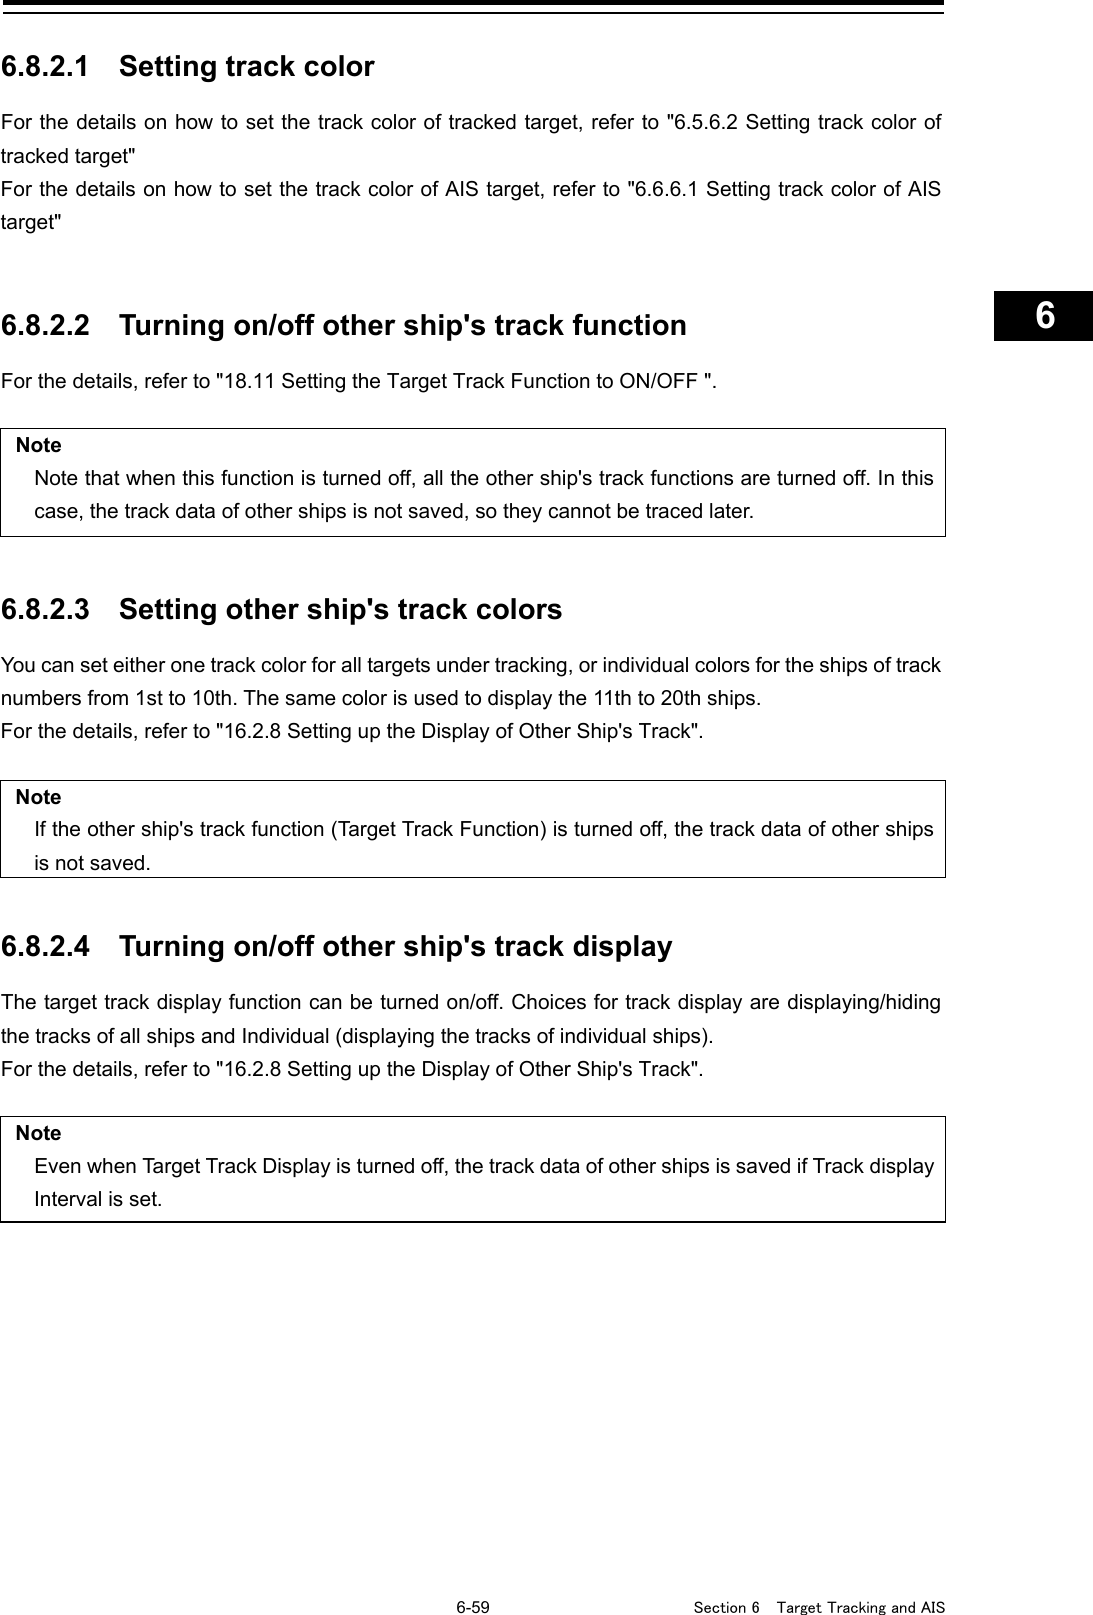   6-59  Section 6  Target Tracking and AIS    1  2  3  4  5  6  7  8  9  10  11  12  13  14  15  16  17  18  19  20  21  22  23  24  25  26  27      6.8.2.1 Setting track color For the details on how to set the track color of tracked target, refer to &quot;6.5.6.2 Setting track color of tracked target&quot; For the details on how to set the track color of AIS target, refer to &quot;6.6.6.1 Setting track color of AIS target&quot;   6.8.2.2 Turning on/off other ship&apos;s track function For the details, refer to &quot;18.11 Setting the Target Track Function to ON/OFF &quot;.  Note Note that when this function is turned off, all the other ship&apos;s track functions are turned off. In this case, the track data of other ships is not saved, so they cannot be traced later.   6.8.2.3 Setting other ship&apos;s track colors You can set either one track color for all targets under tracking, or individual colors for the ships of track numbers from 1st to 10th. The same color is used to display the 11th to 20th ships. For the details, refer to &quot;16.2.8 Setting up the Display of Other Ship&apos;s Track&quot;.  Note If the other ship&apos;s track function (Target Track Function) is turned off, the track data of other ships is not saved.   6.8.2.4 Turning on/off other ship&apos;s track display The target track display function can be turned on/off. Choices for track display are displaying/hiding the tracks of all ships and Individual (displaying the tracks of individual ships). For the details, refer to &quot;16.2.8 Setting up the Display of Other Ship&apos;s Track&quot;.  Note Even when Target Track Display is turned off, the track data of other ships is saved if Track display Interval is set.    